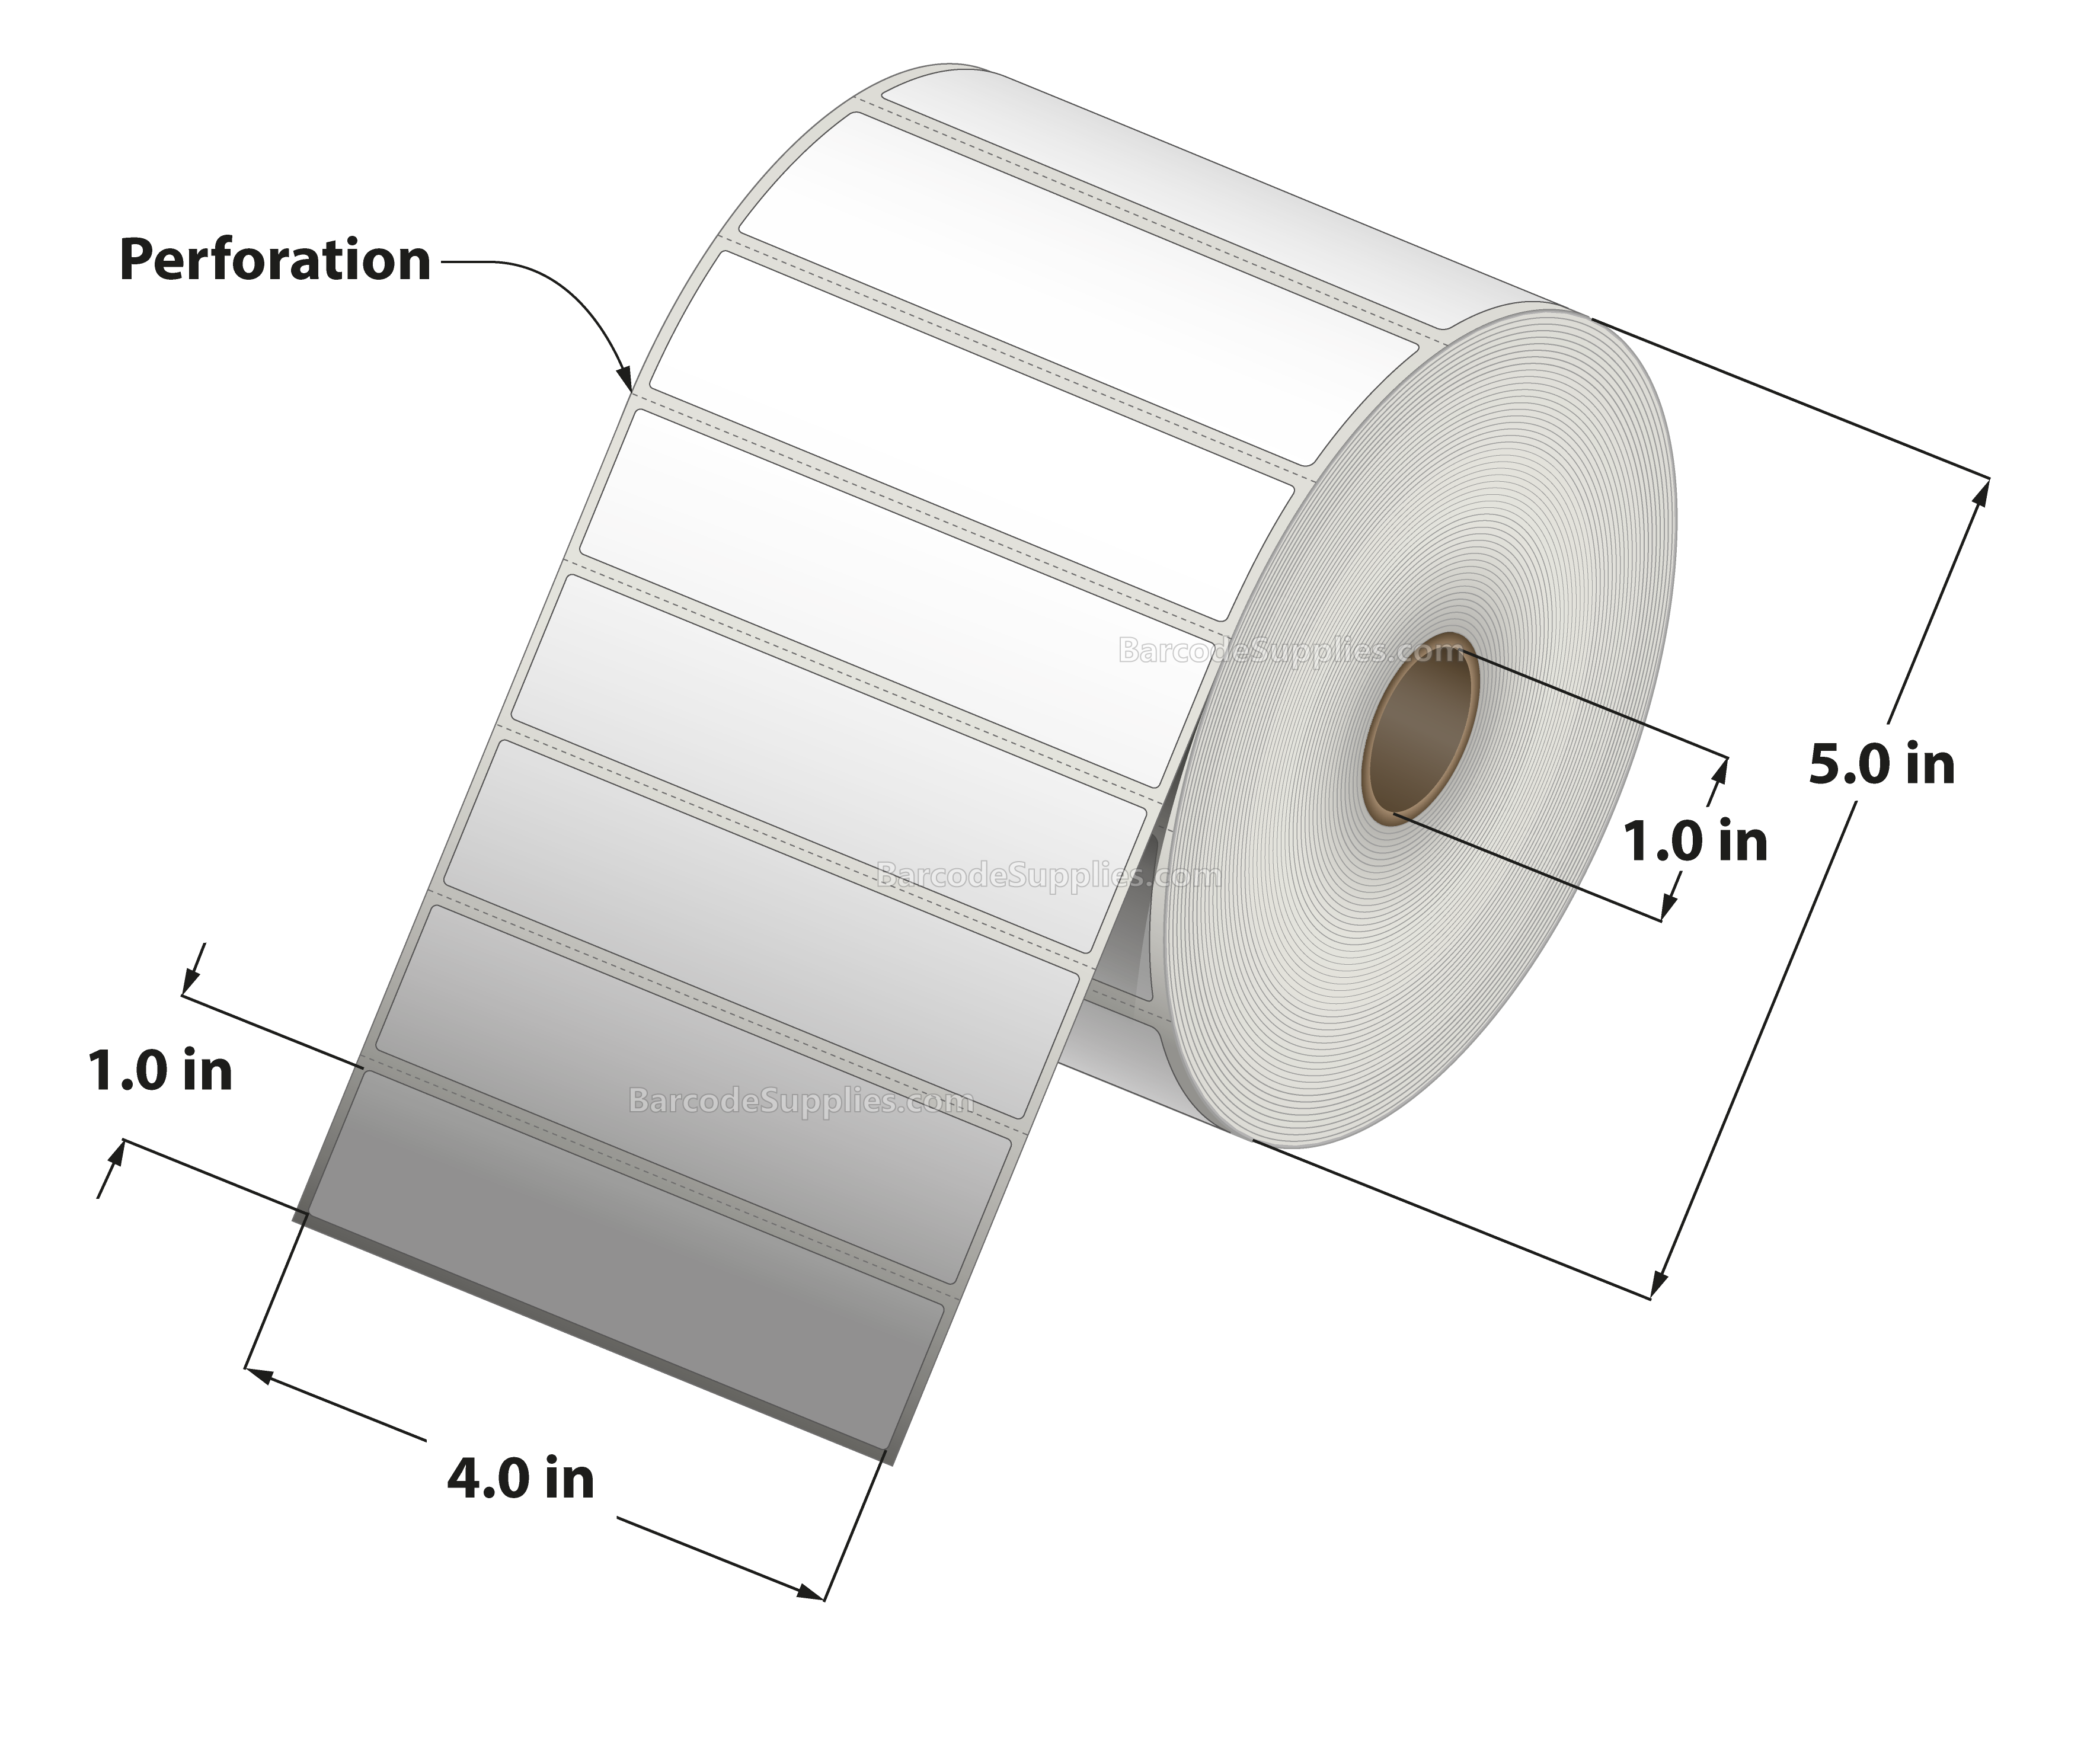 4 x 1 Direct Thermal White Labels With Acrylic Adhesive - Perforated - 2500 Labels Per Roll - Carton Of 12 Rolls - 30000 Labels Total - MPN: RD-4-1-2500-1 - BarcodeSource, Inc.